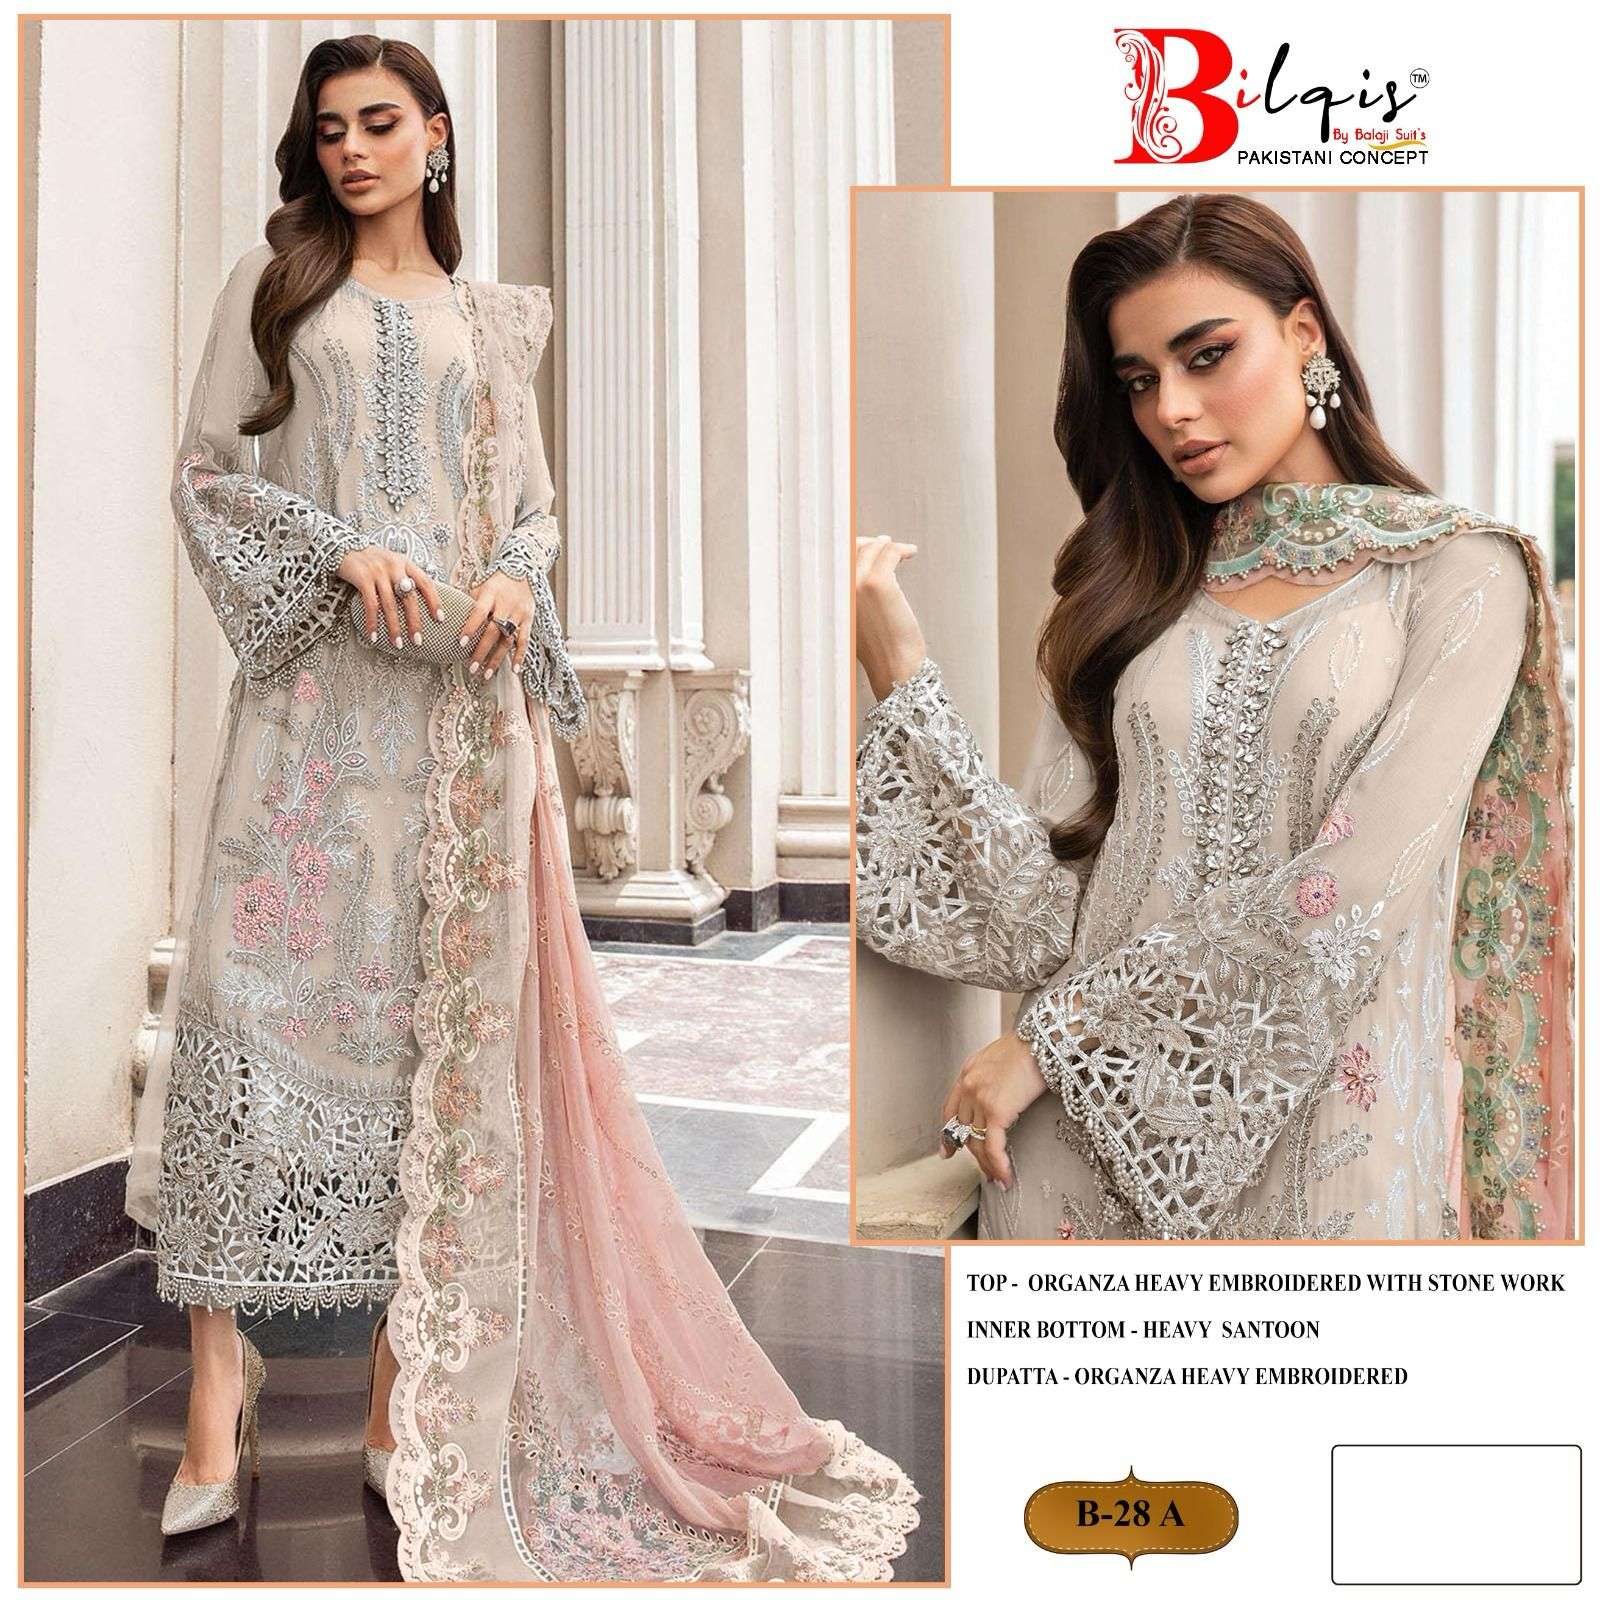 BILQIS TM B 28 ORGANZA WITH EMBROIDERY WORK PAKISTANI SUITS 